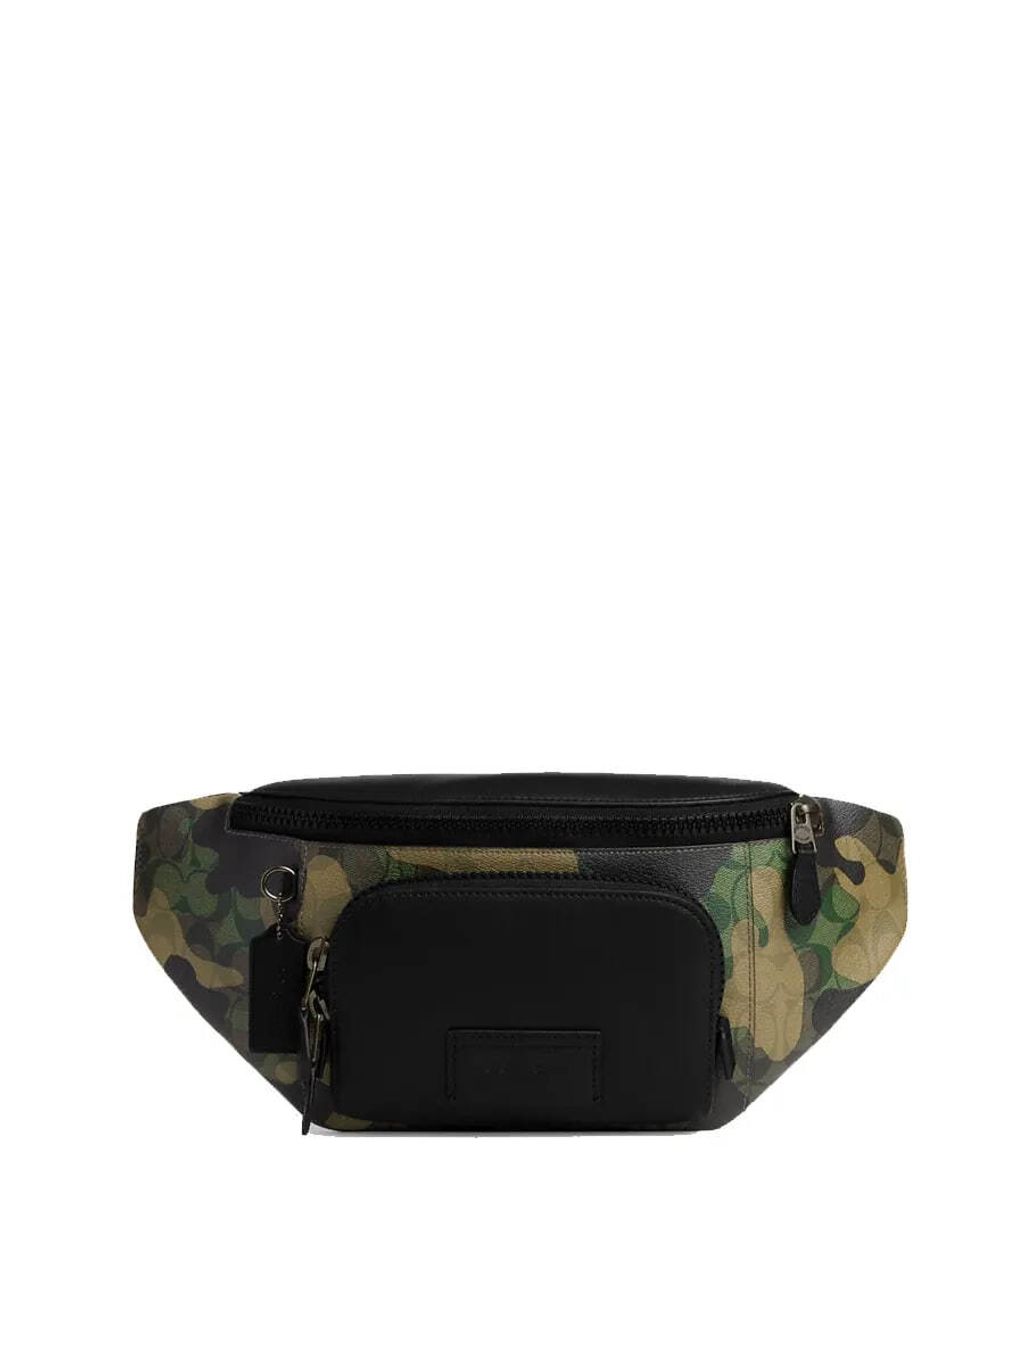 handbagbranded.com getlush outlet personalshopper usa Coach malaysia ready stock Coach Track Belt Bag In Signature Canvas With Camo Print